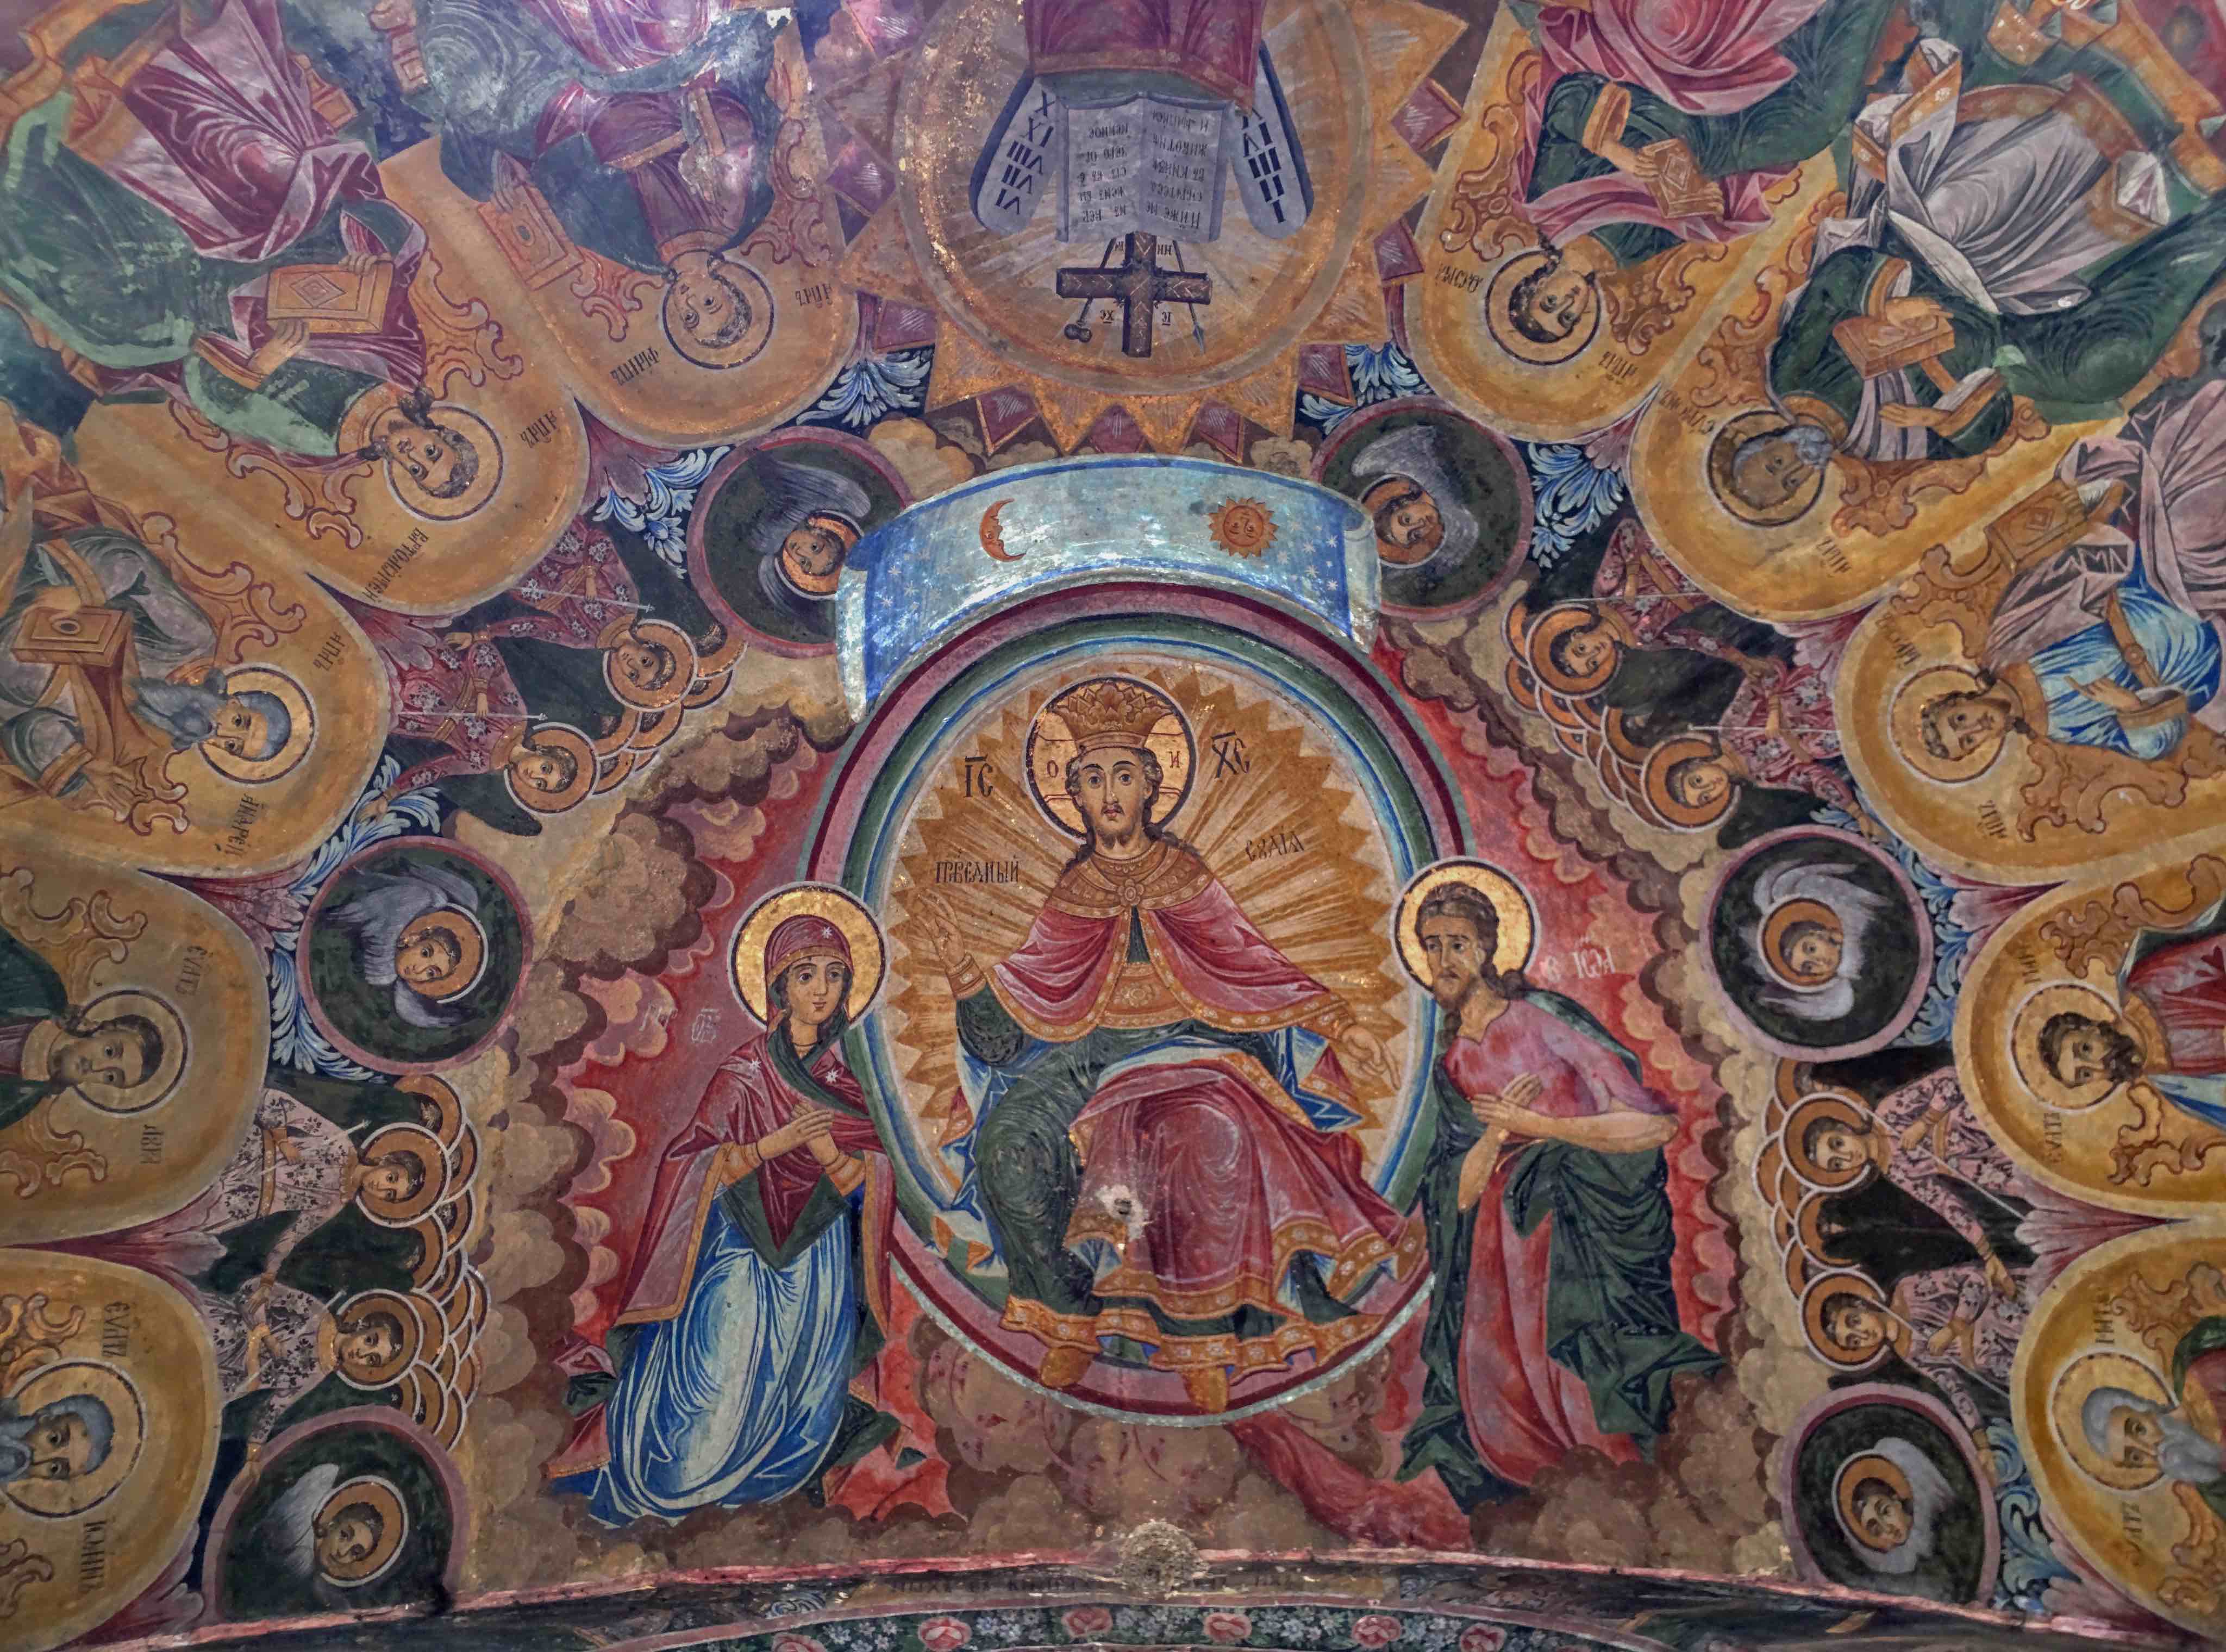 Another fresco at another part of the ceiling.